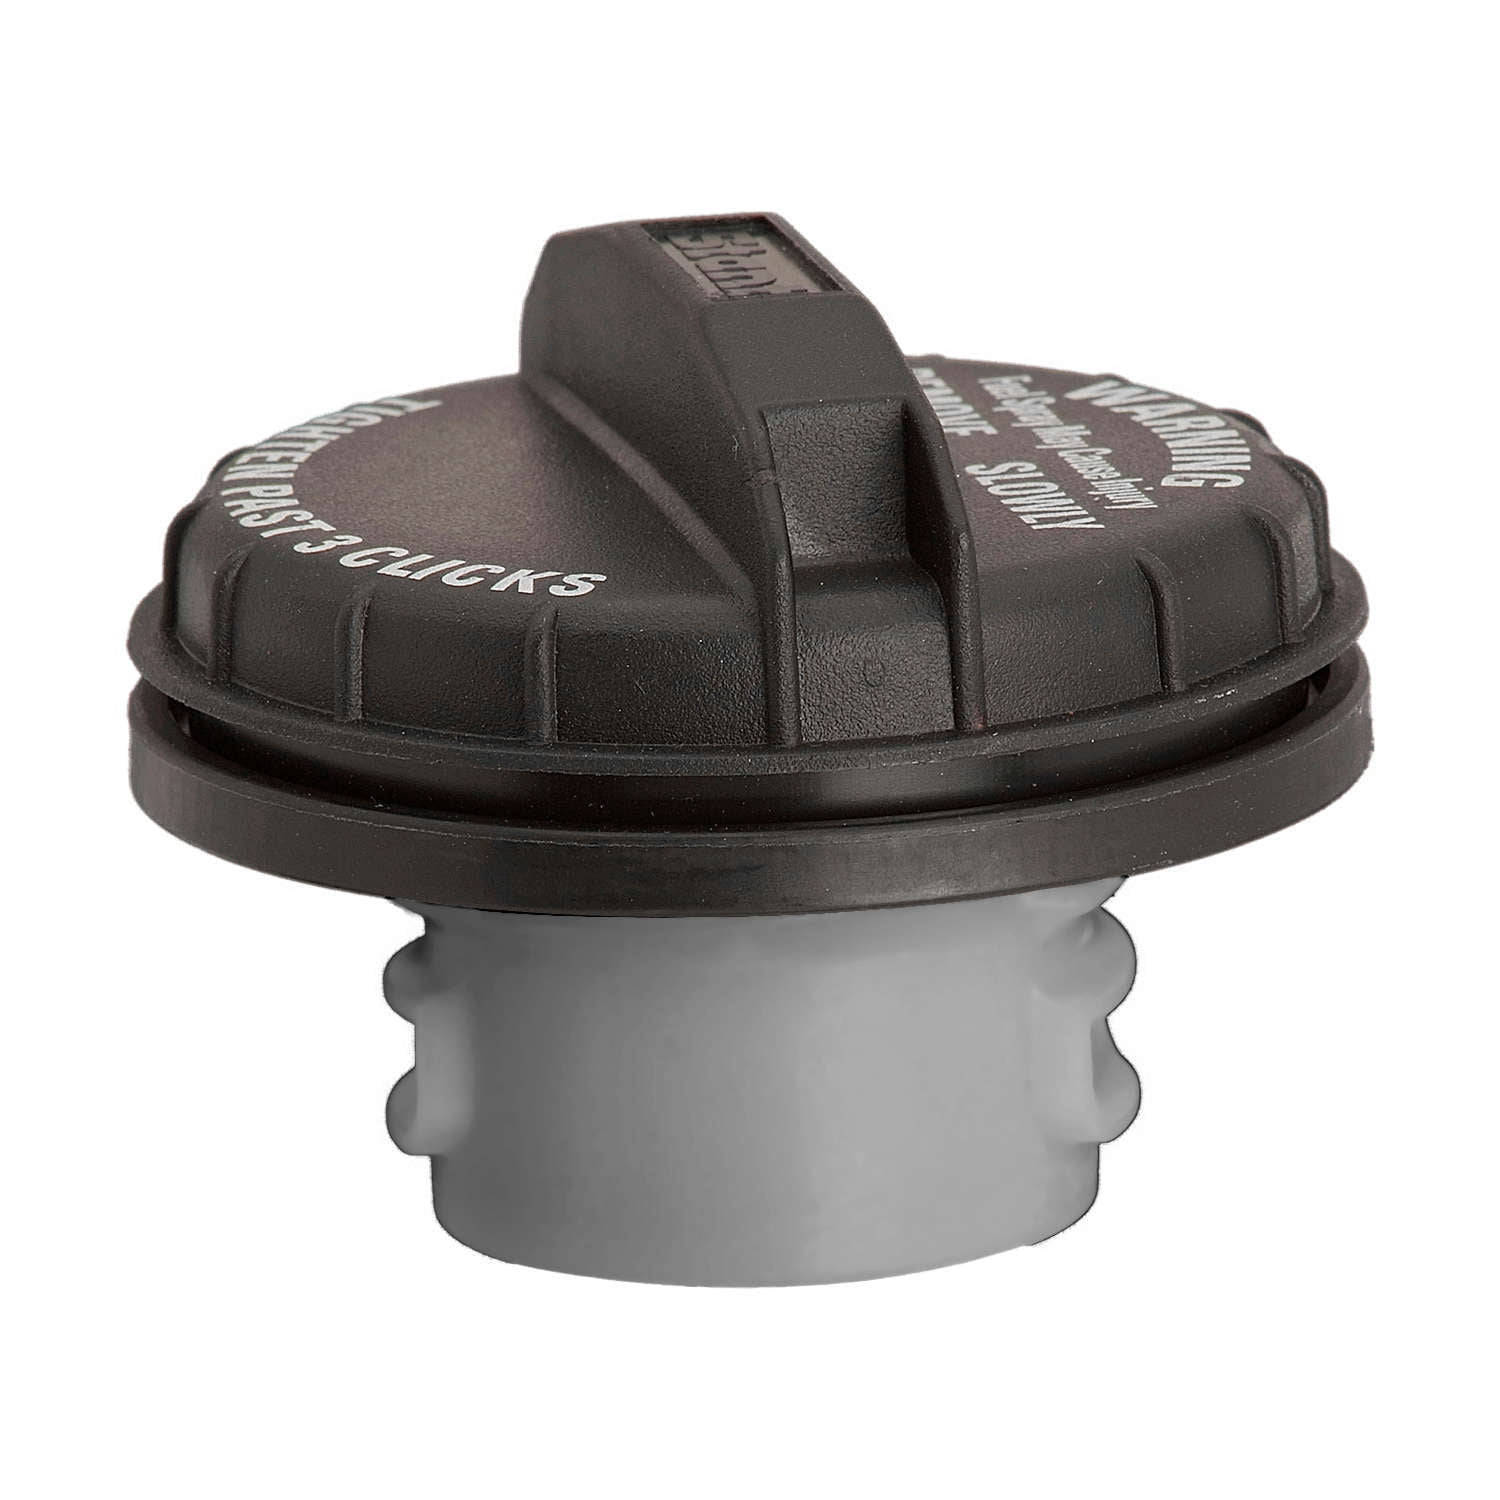 Stant OE Equivalent Tethered Fuel Cap 